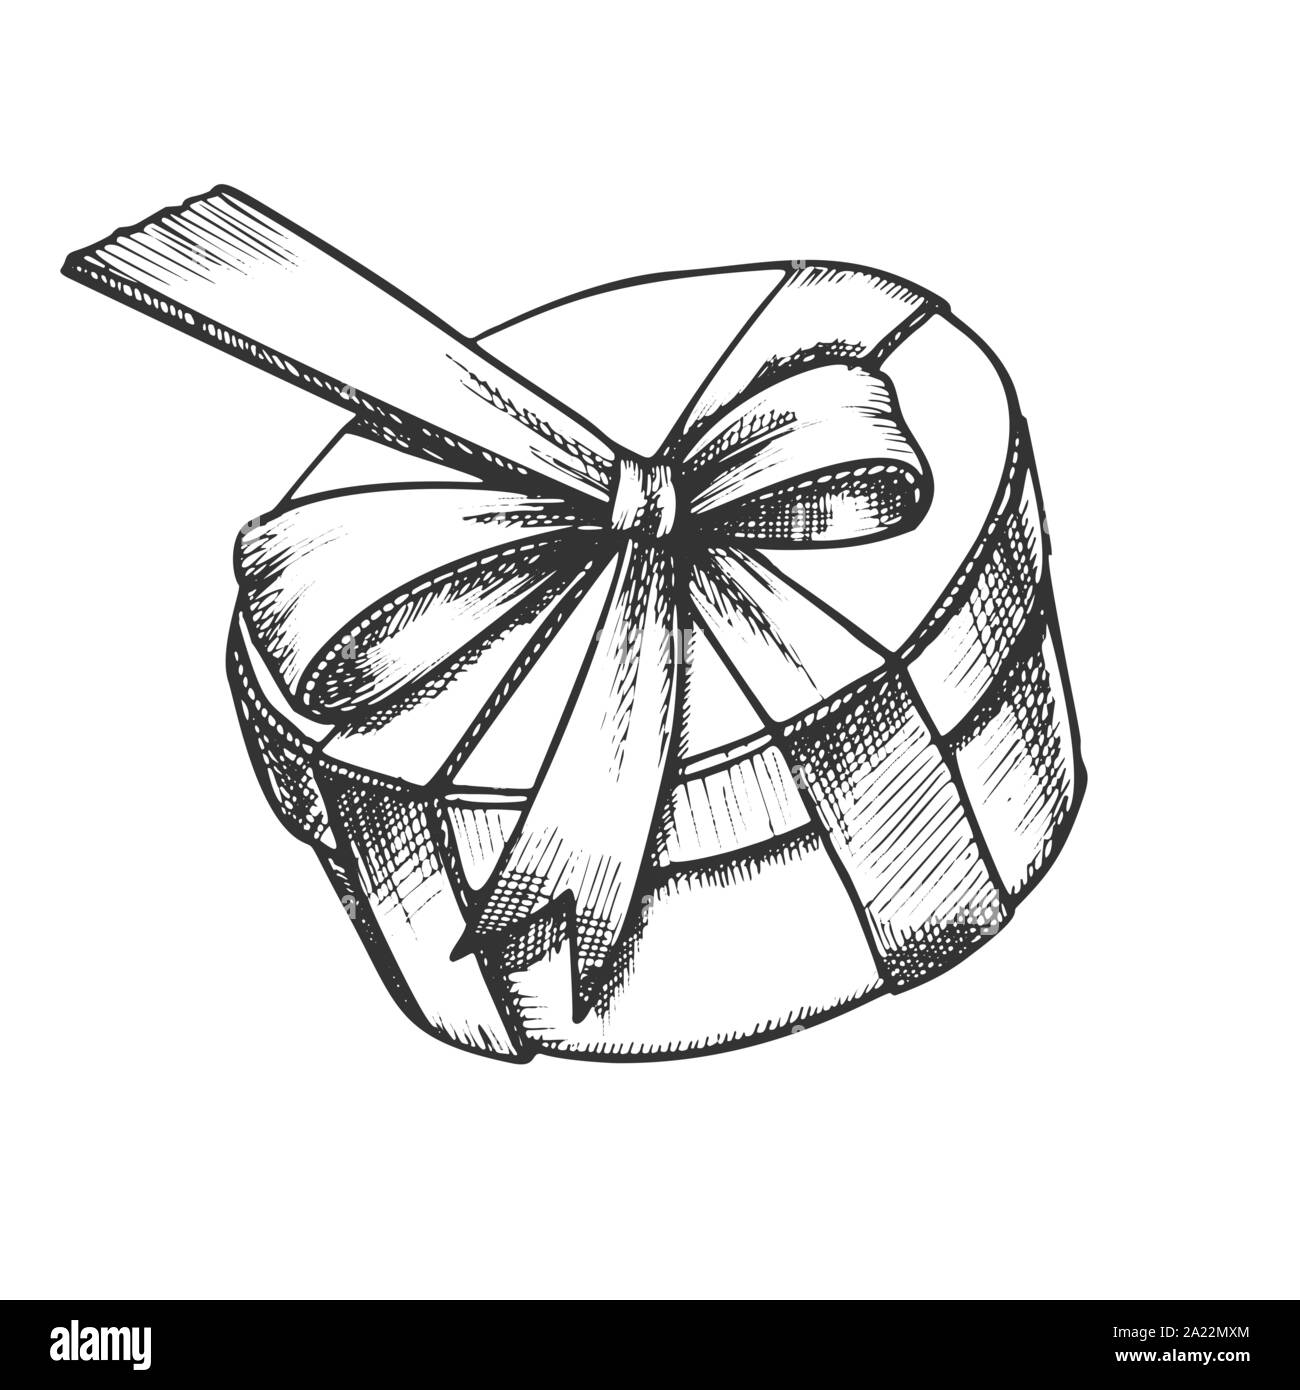 https://c8.alamy.com/comp/2A22MXM/gift-box-in-round-shape-with-ribbon-retro-vector-2A22MXM.jpg